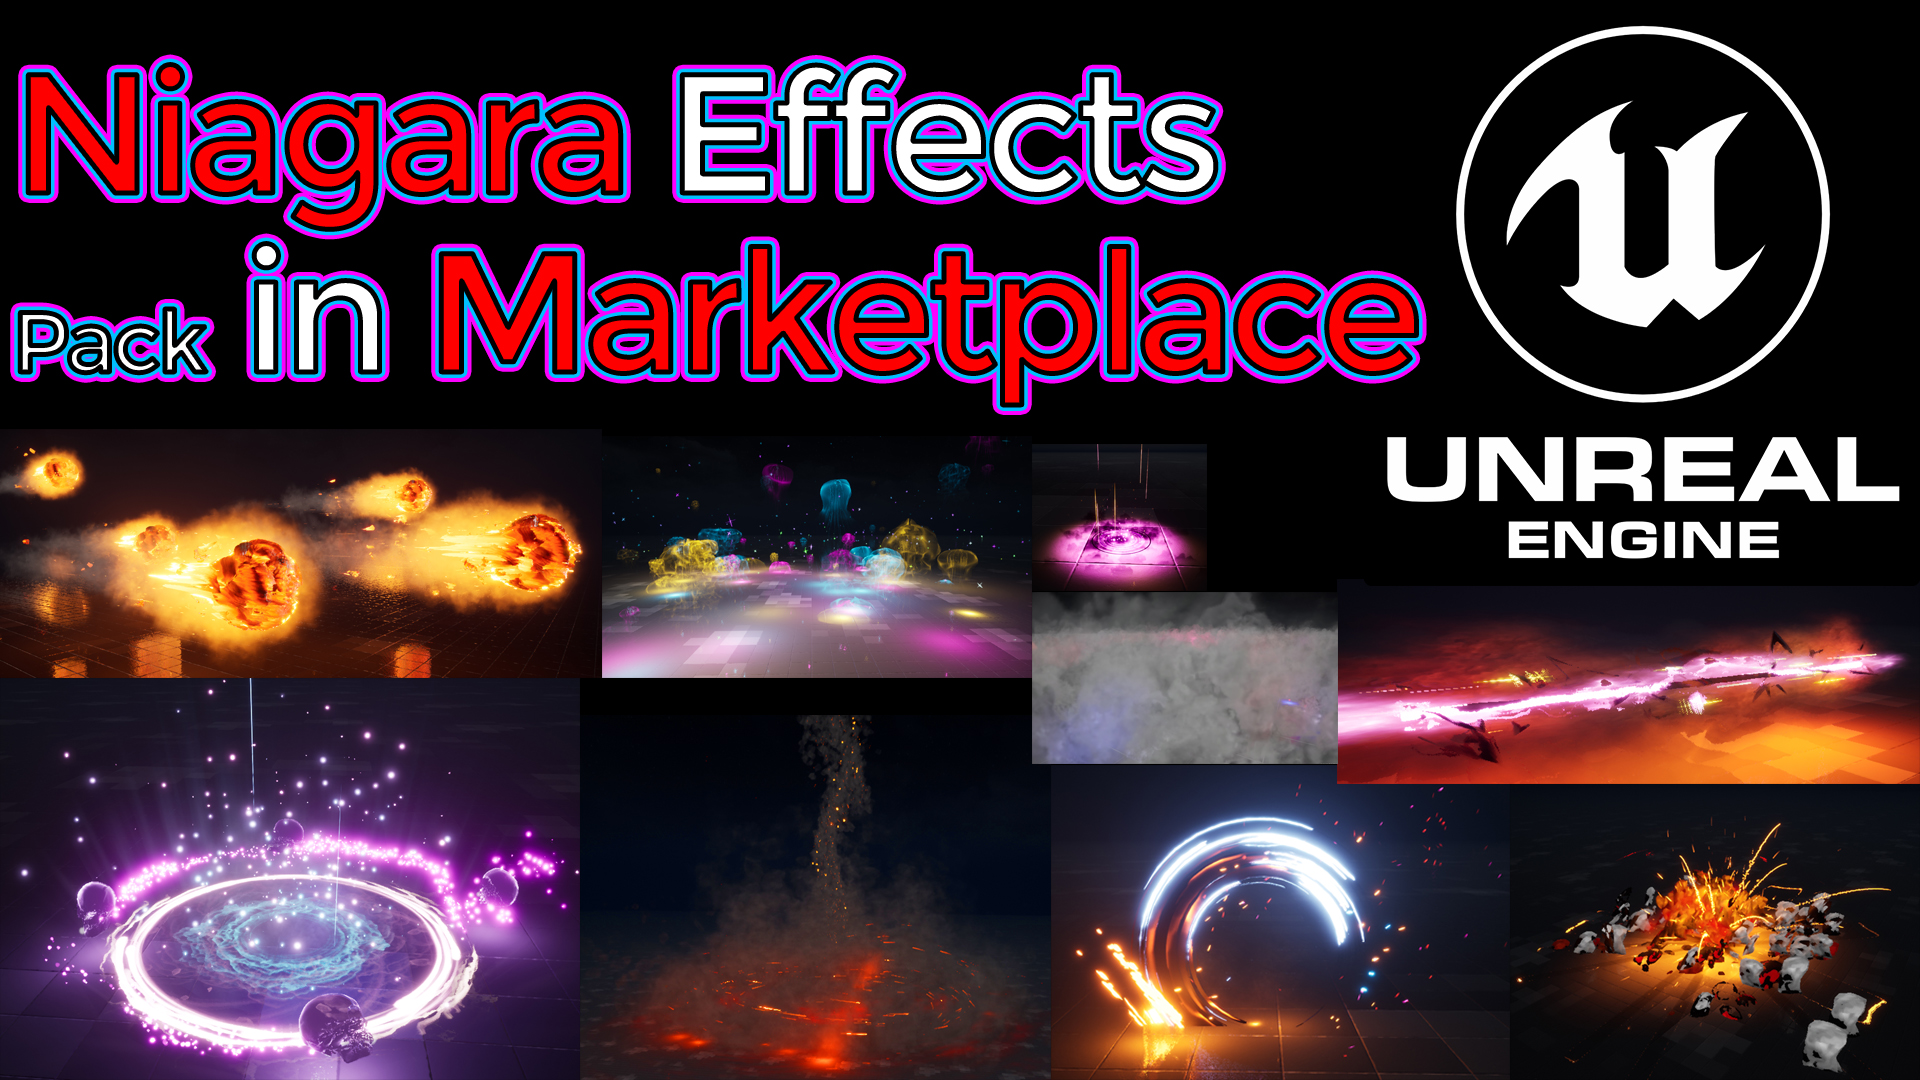 Niagara Effects Pack in Marketplace